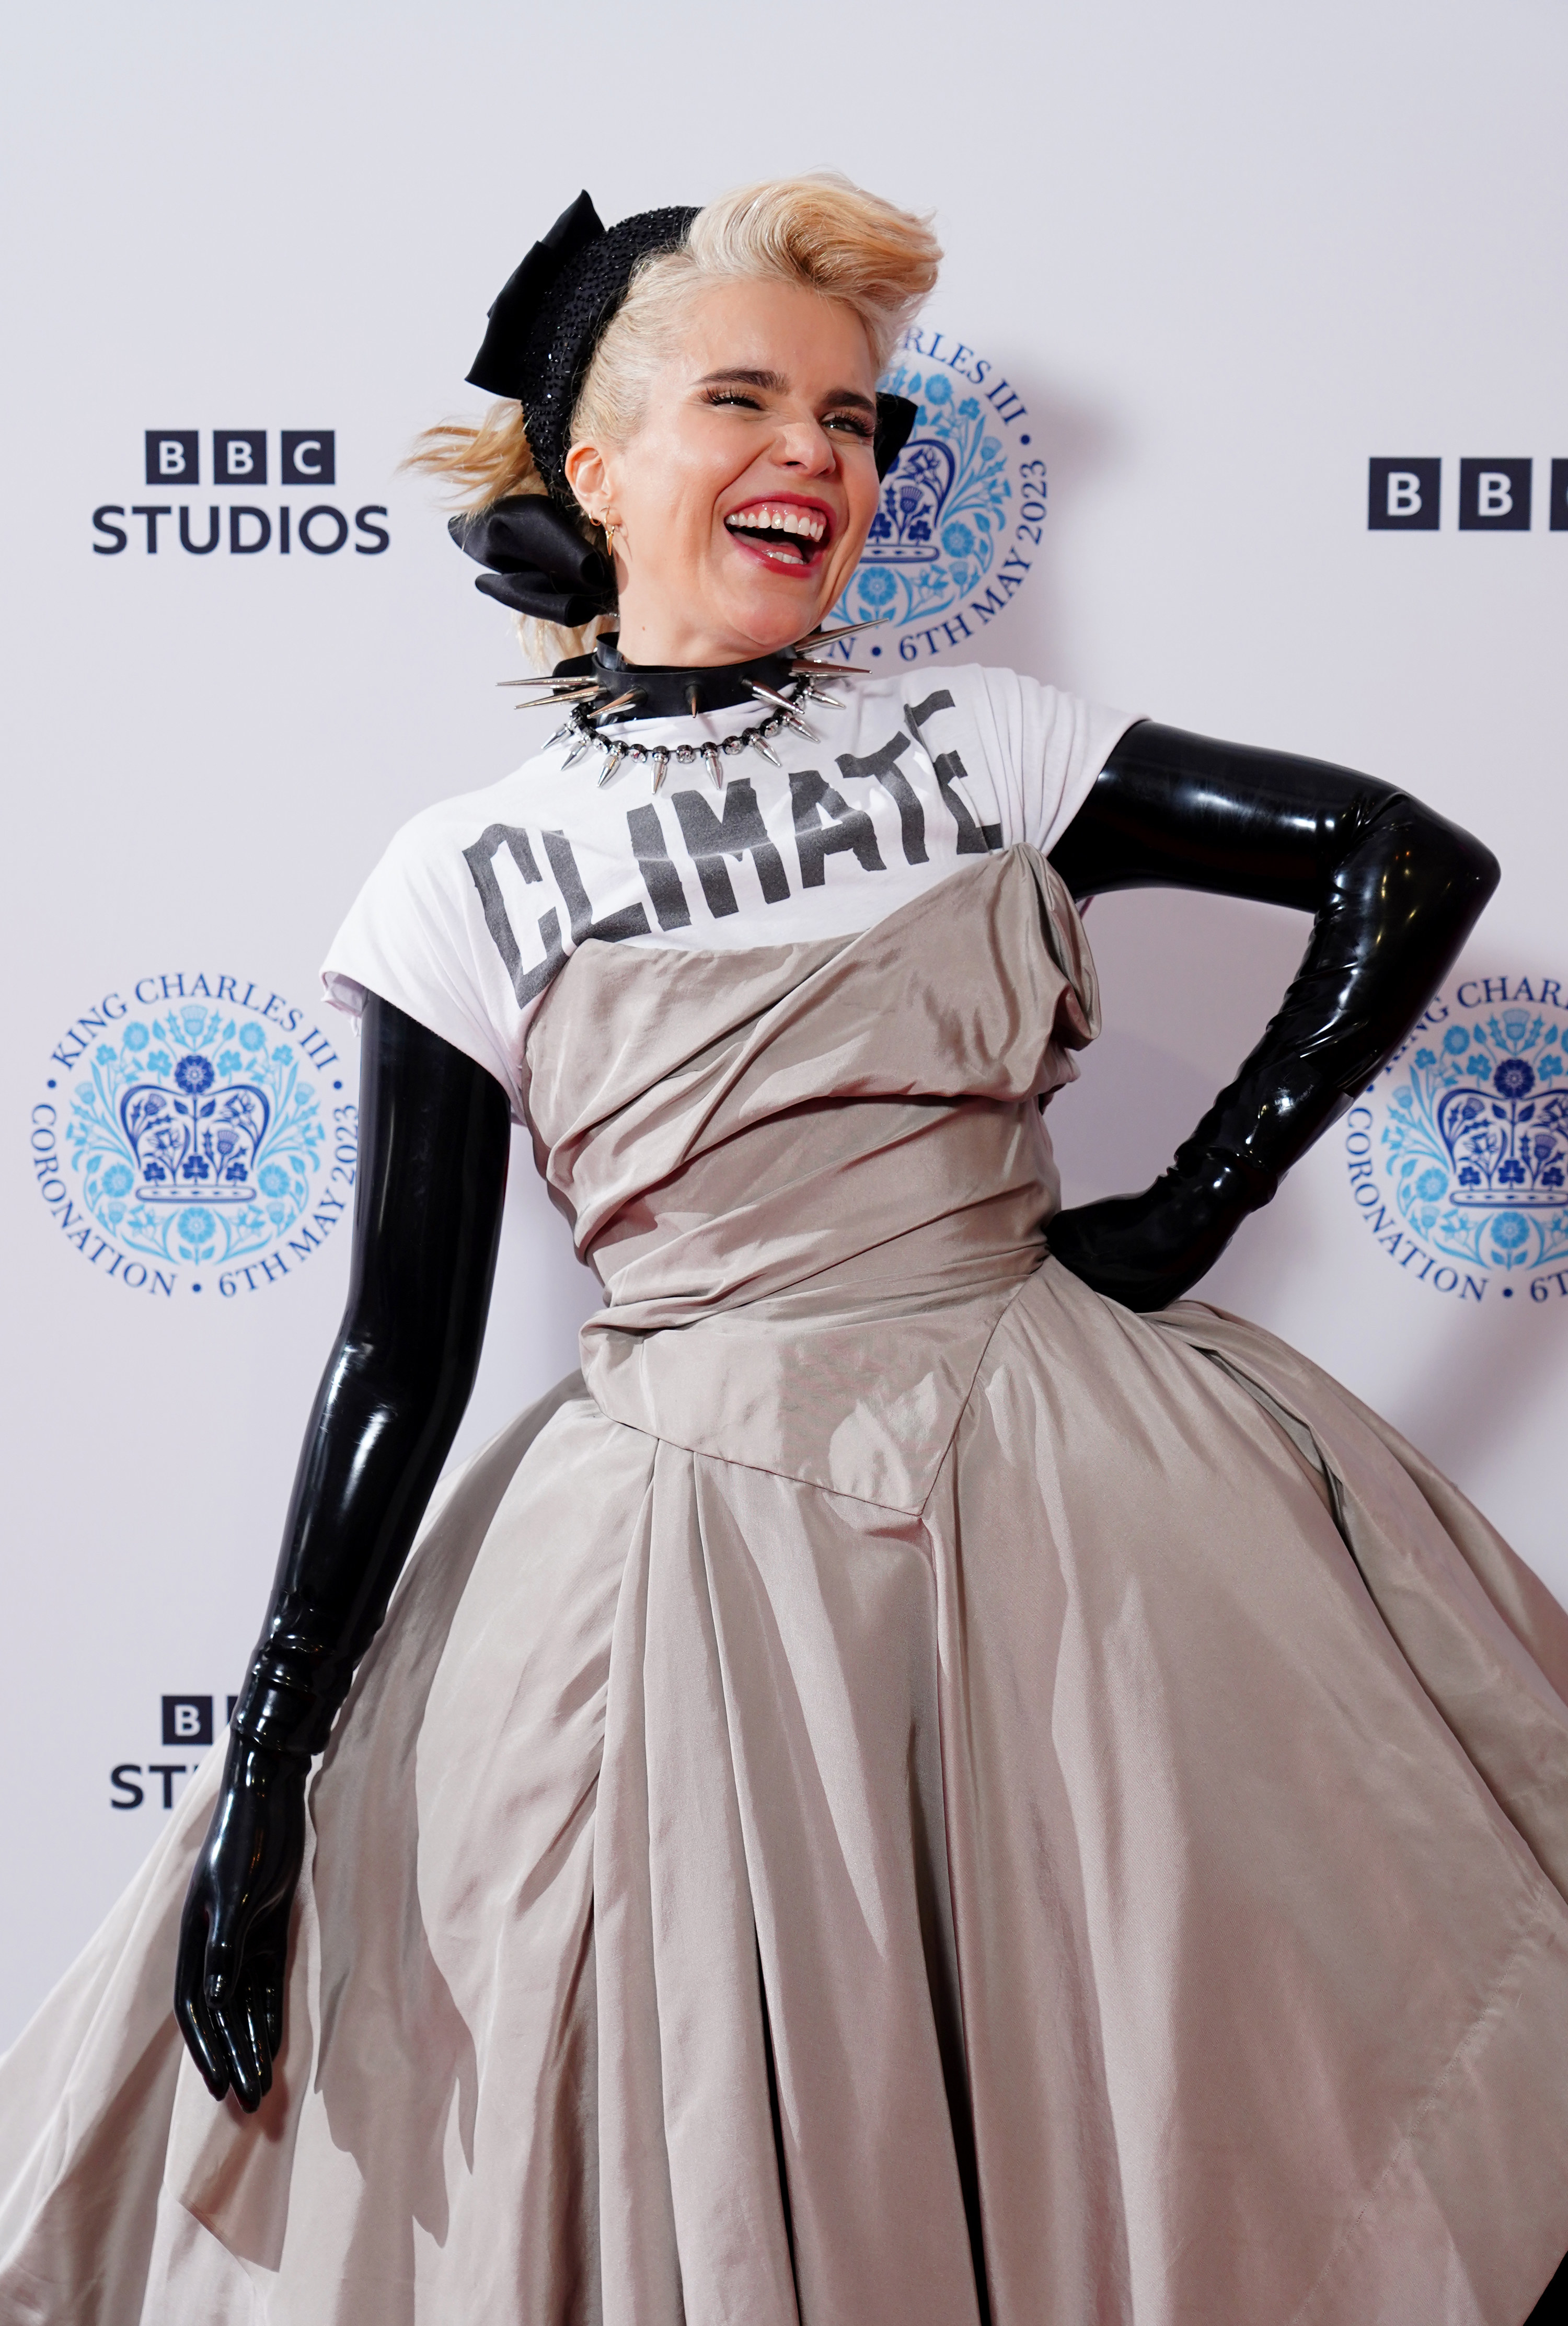 A closeup of Paloma smiling on the red carpet at an event